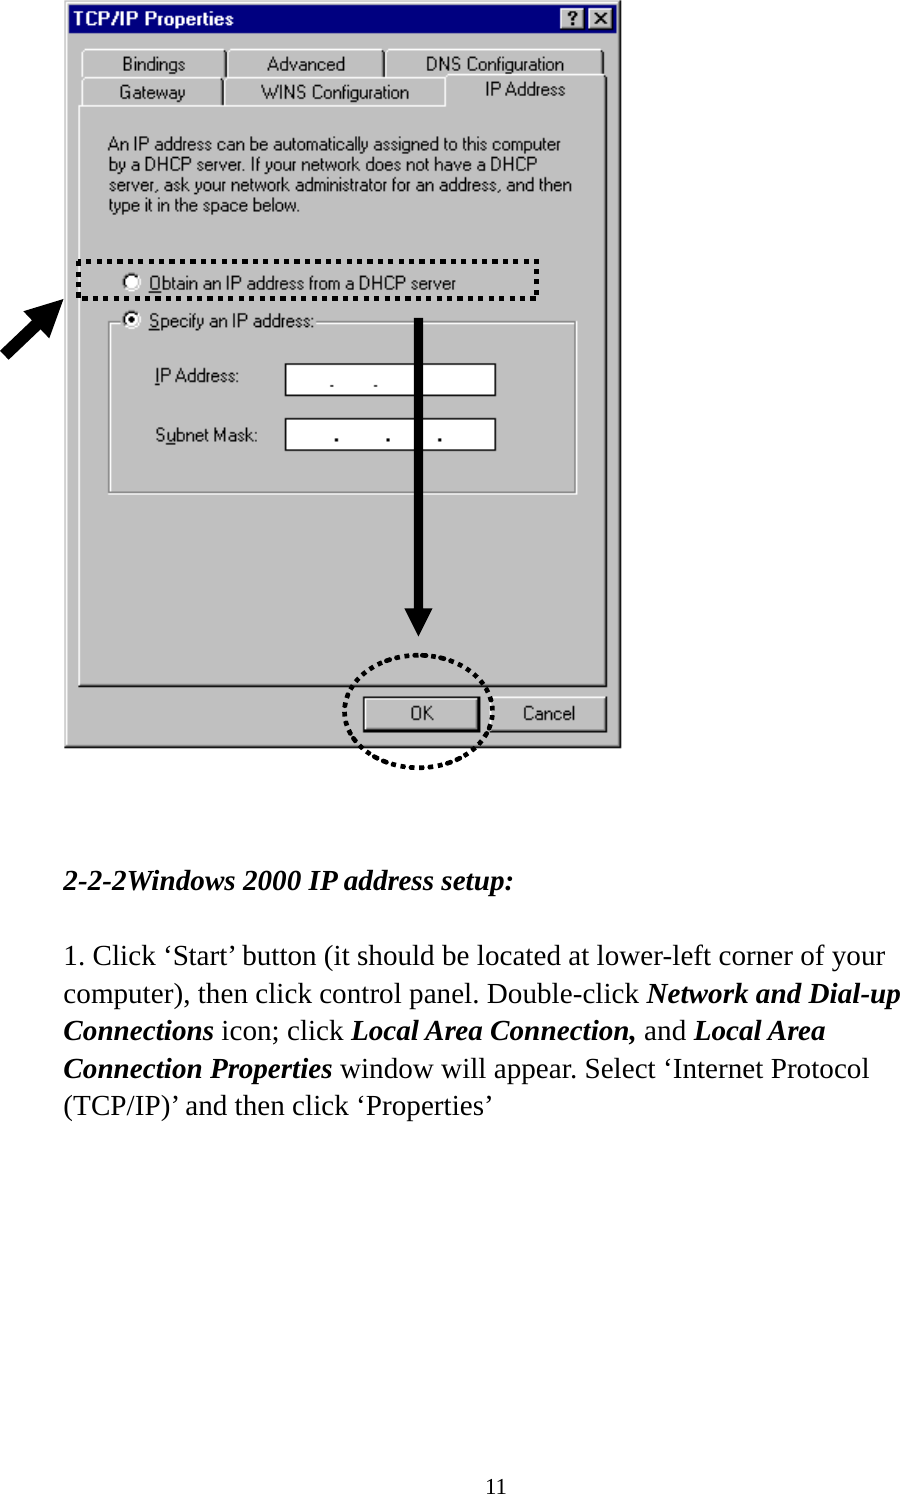 11     2-2-2Windows 2000 IP address setup:  1. Click ‘Start’ button (it should be located at lower-left corner of your computer), then click control panel. Double-click Network and Dial-up Connections icon; click Local Area Connection, and Local Area Connection Properties window will appear. Select ‘Internet Protocol (TCP/IP)’ and then click ‘Properties’    